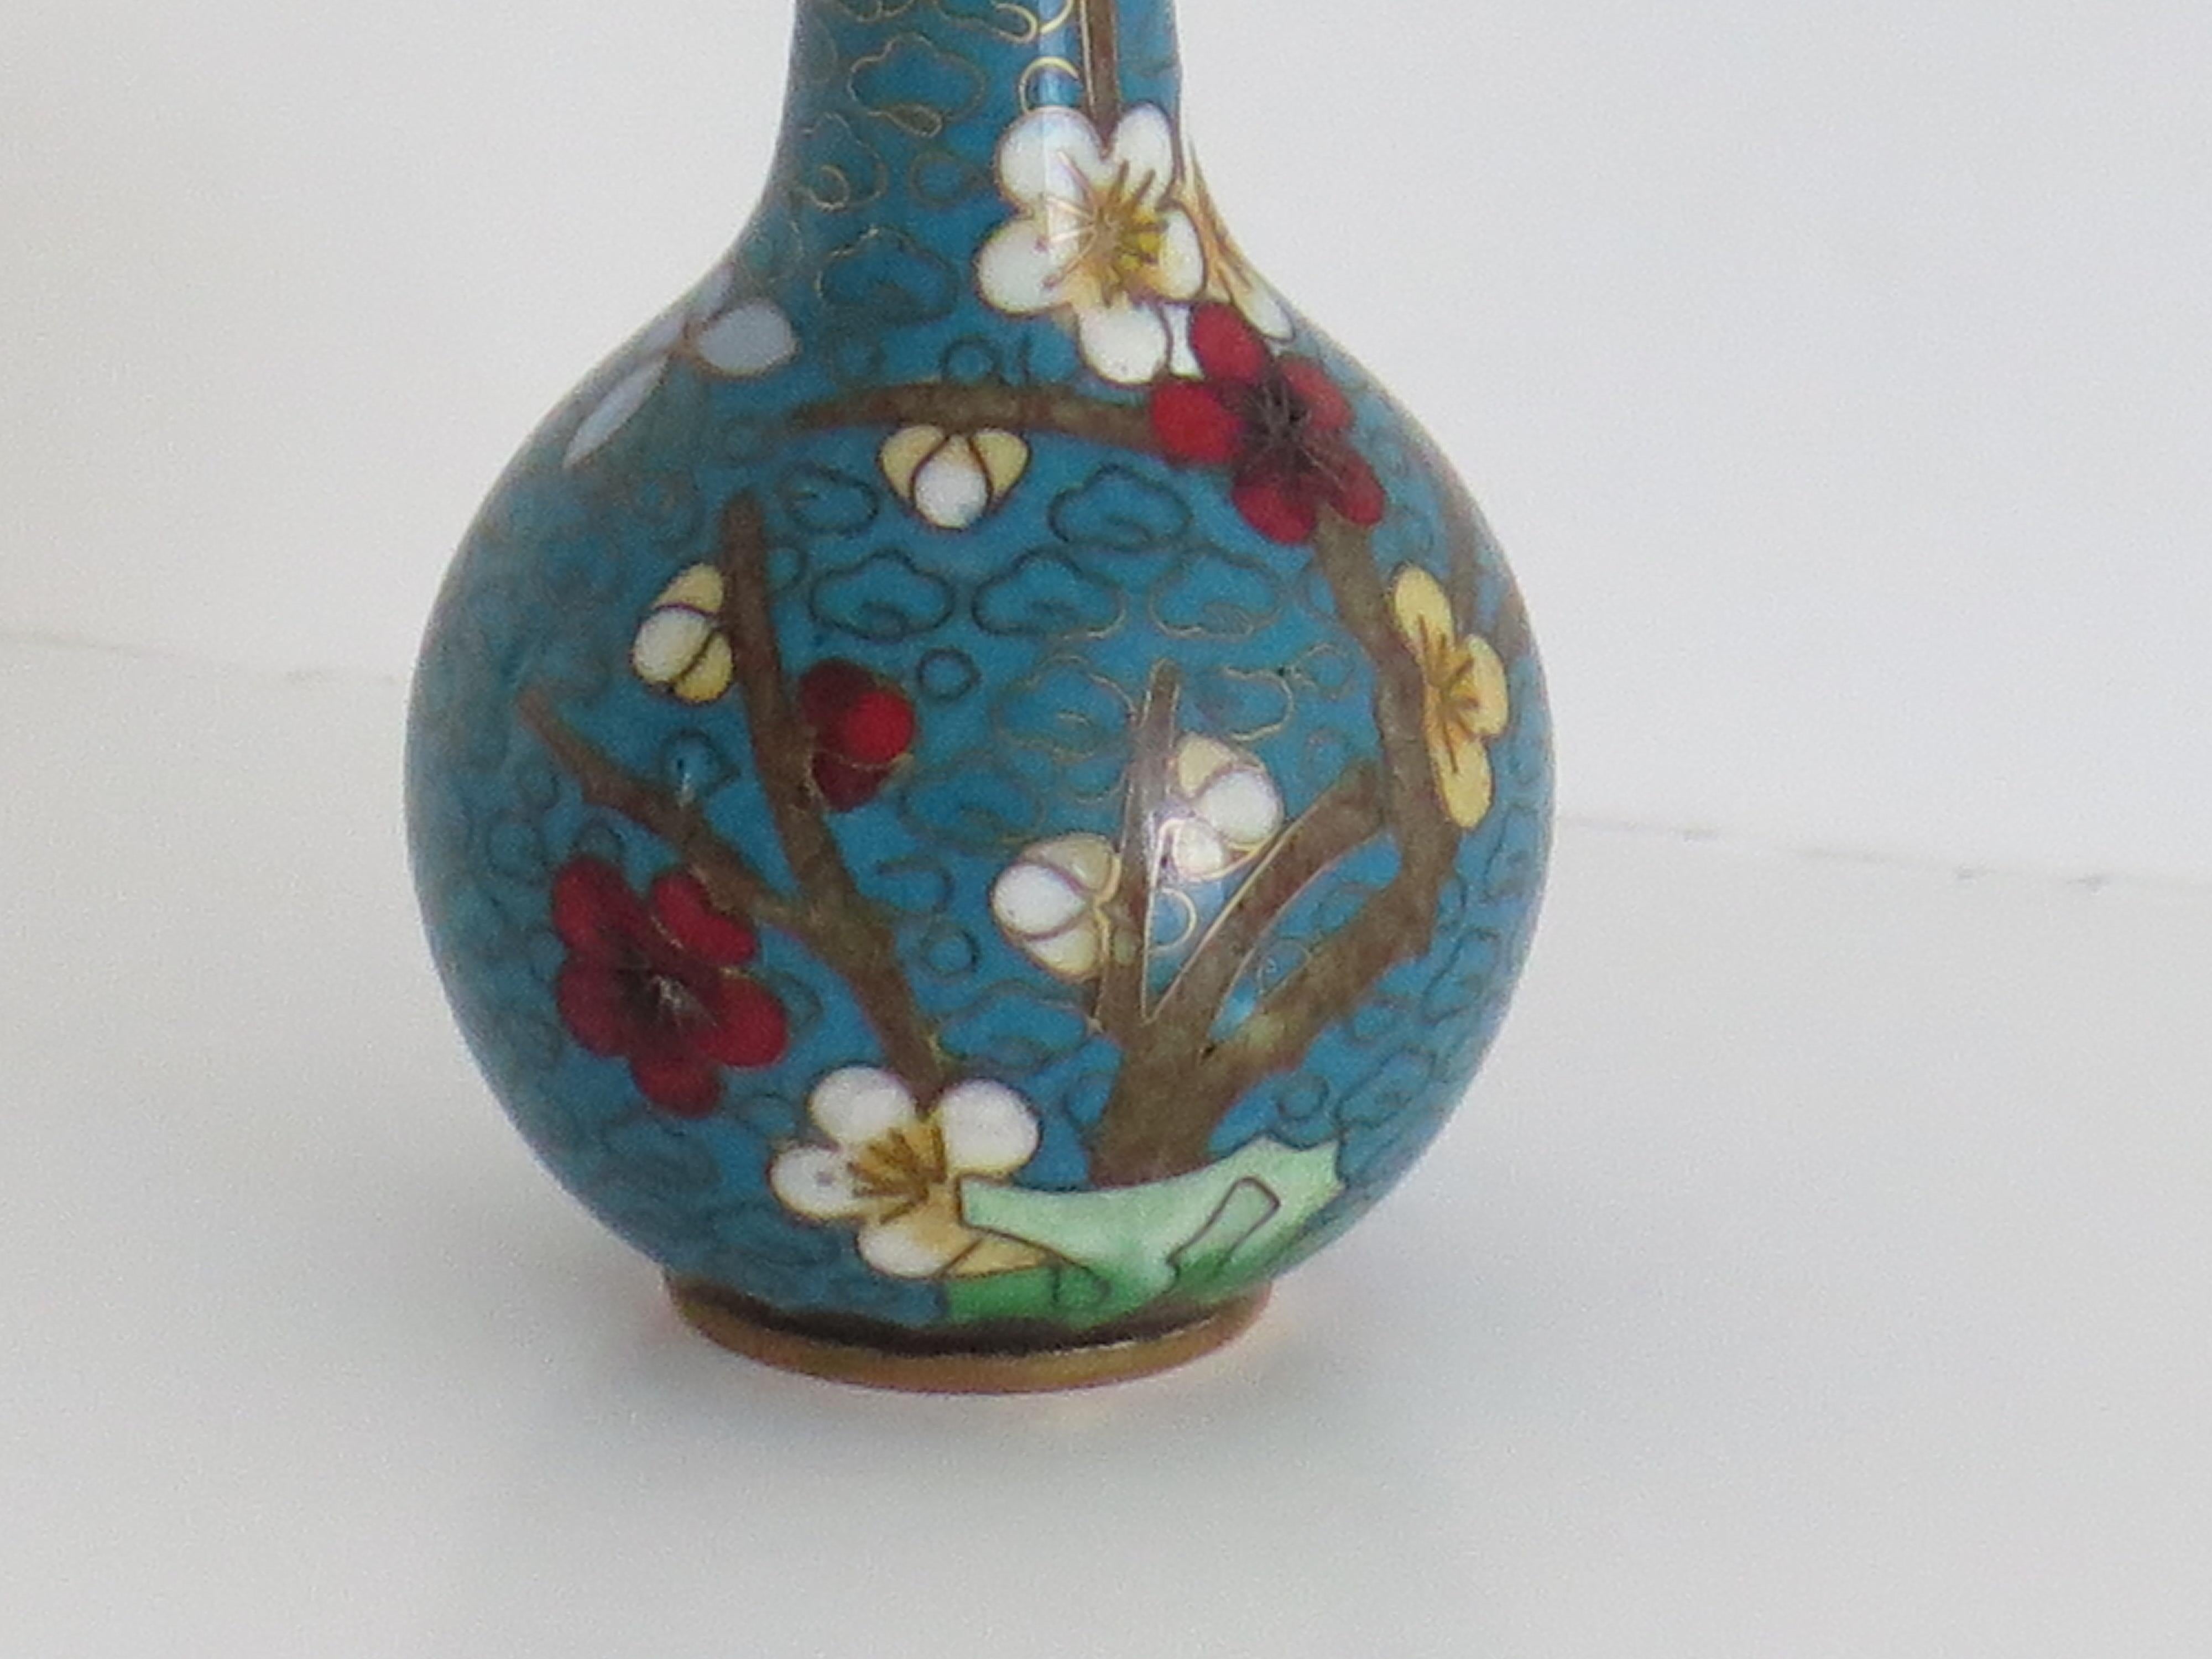 Ceramic Chinese Cloisonné small Vase with flowers & bird, Circa 1920 For Sale